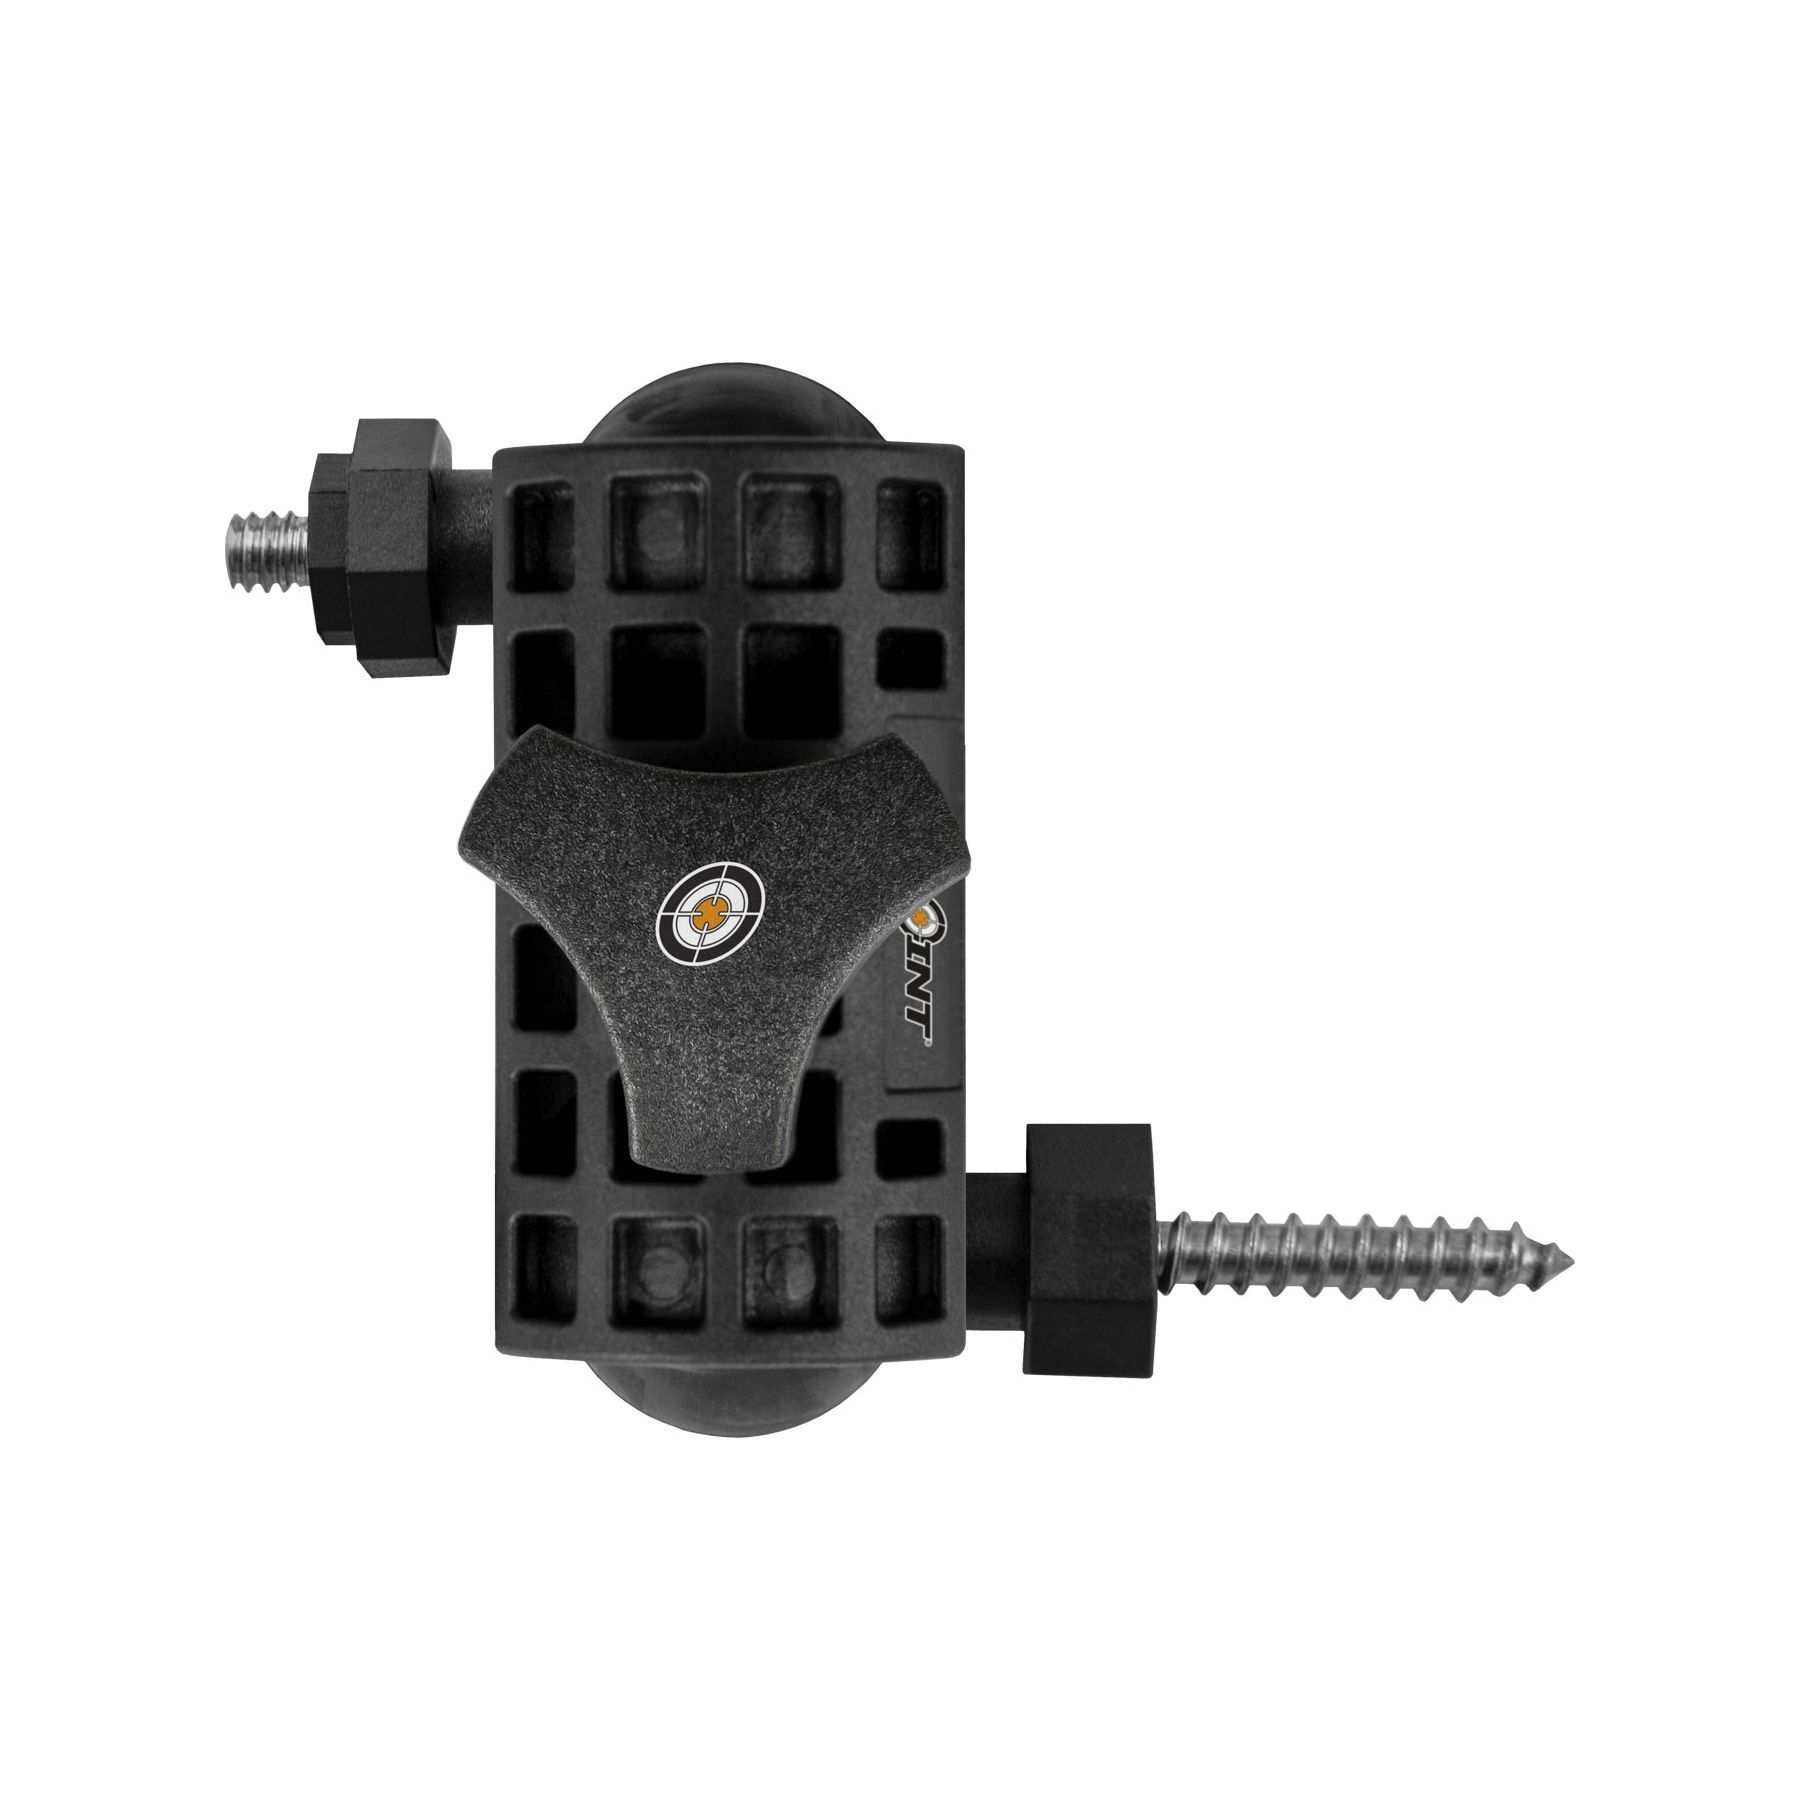 SPYPOINT mounting screw MA-500